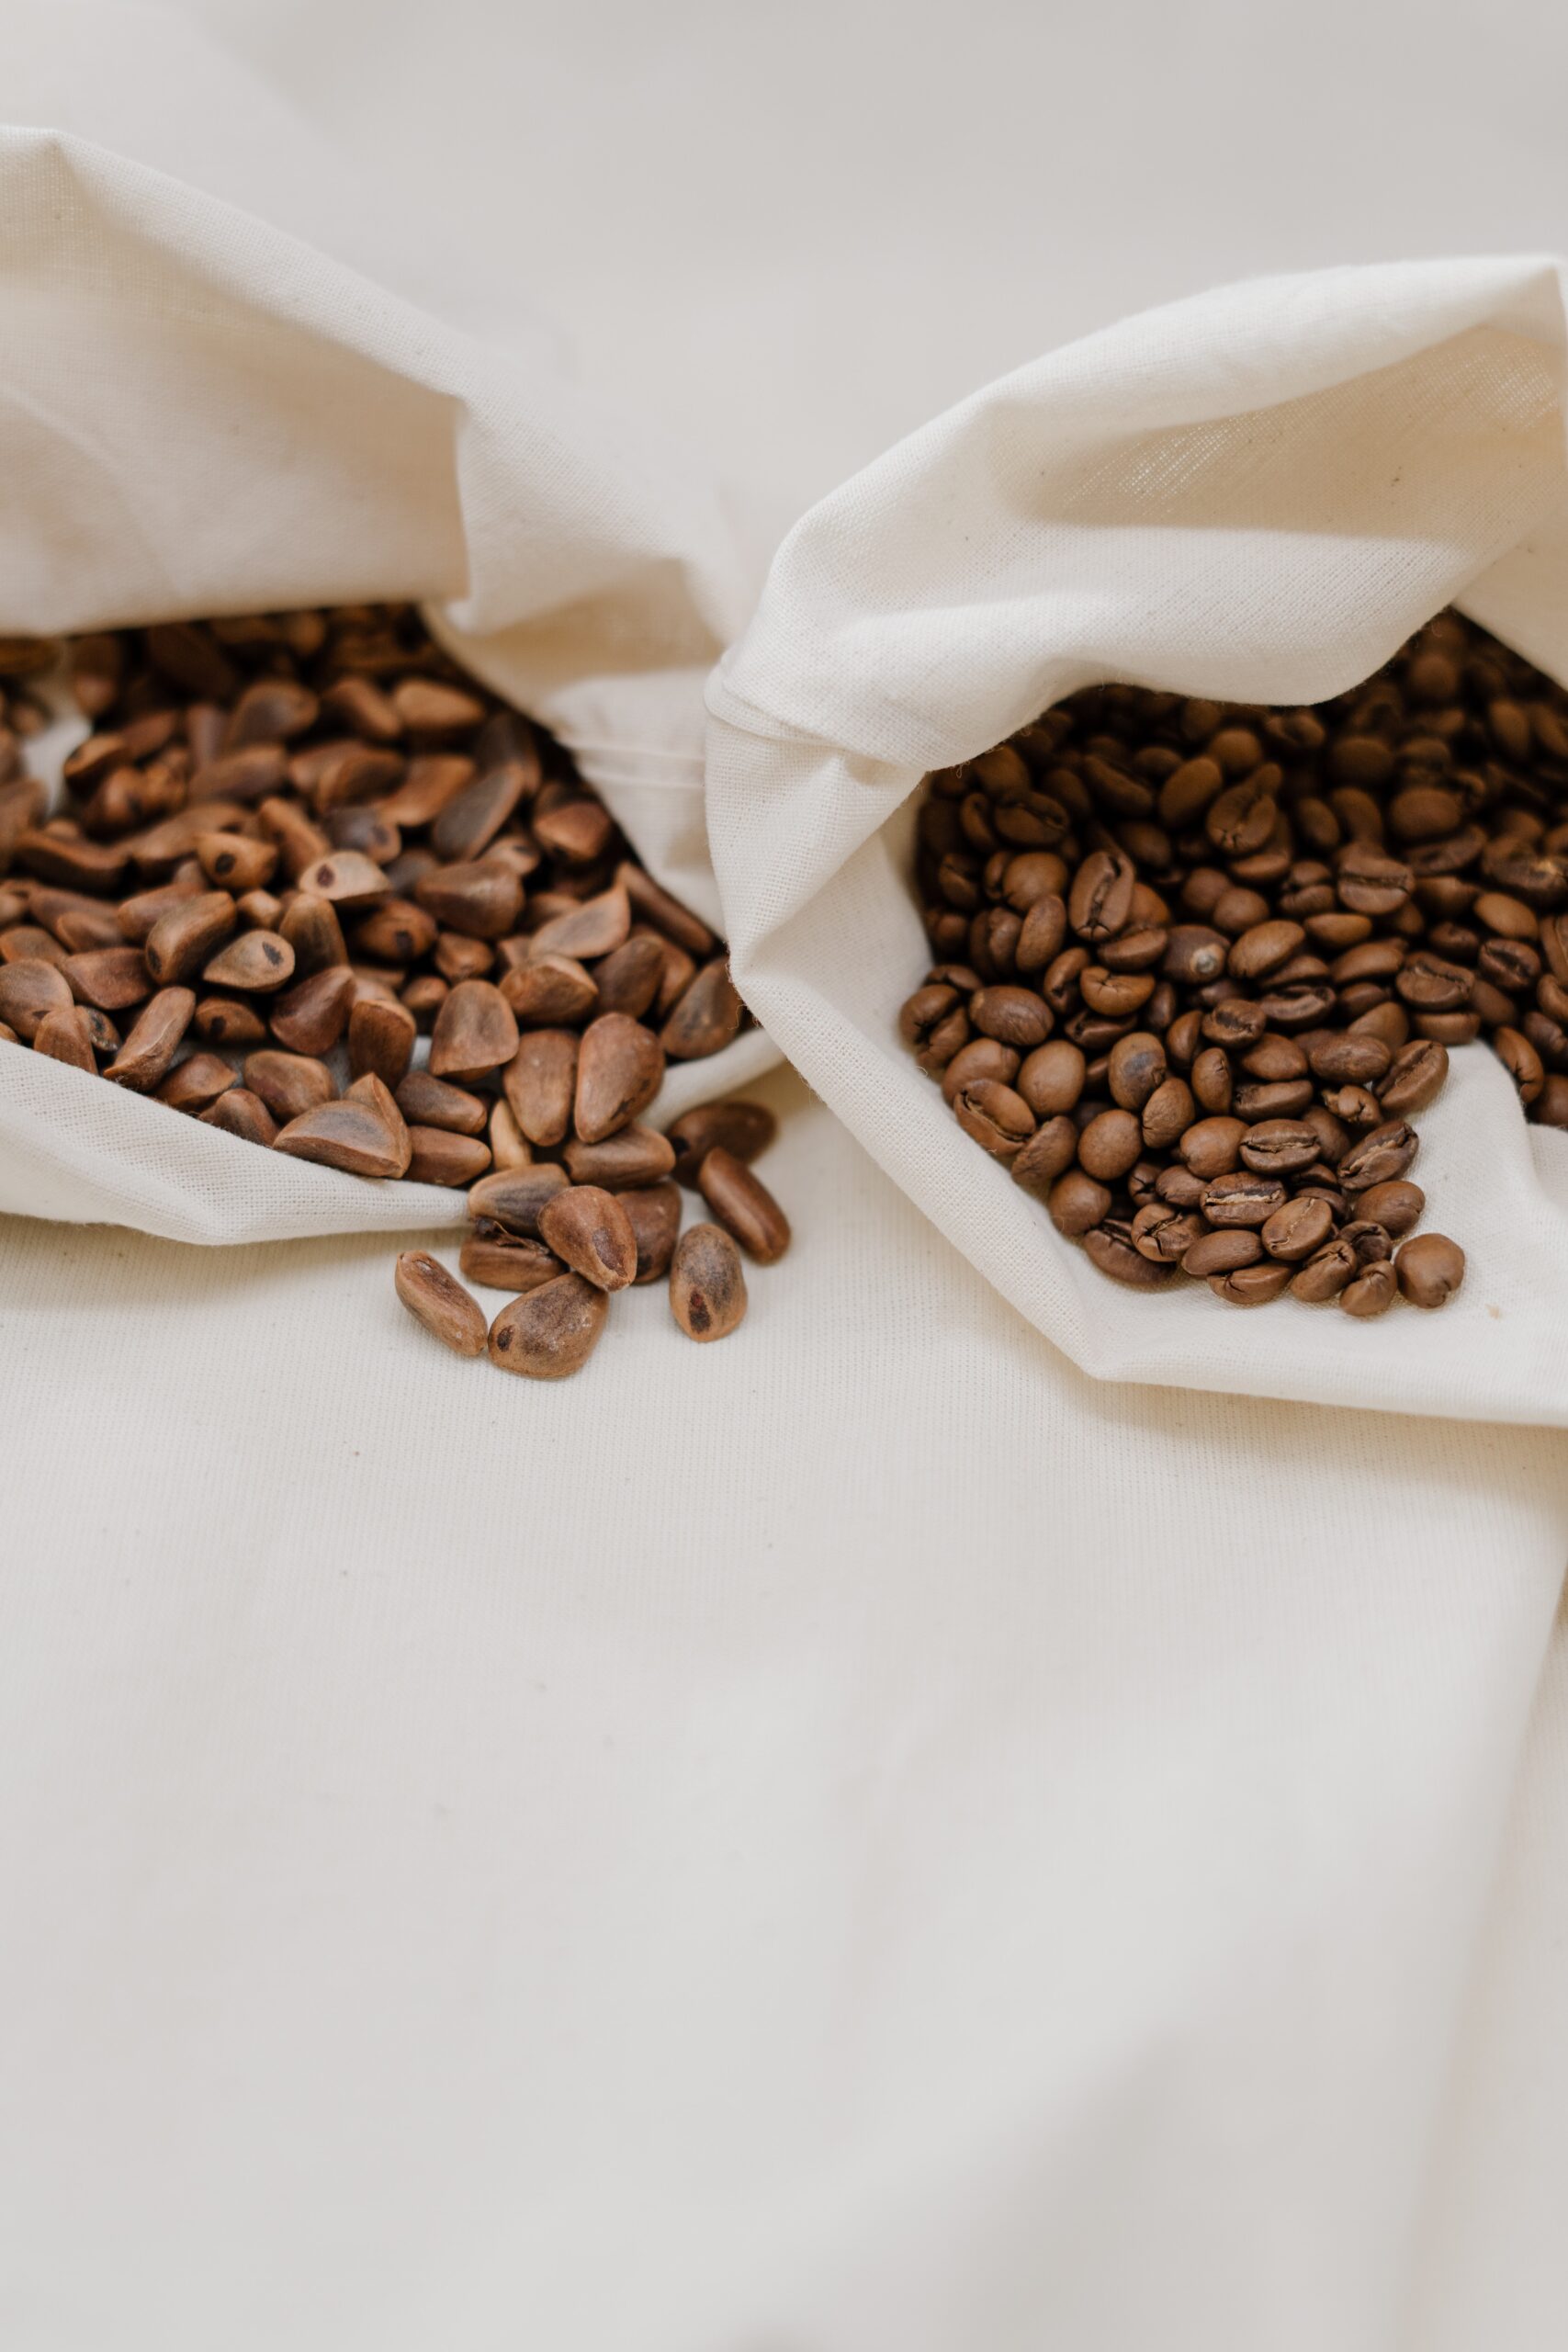 Market growth in ecological coffee